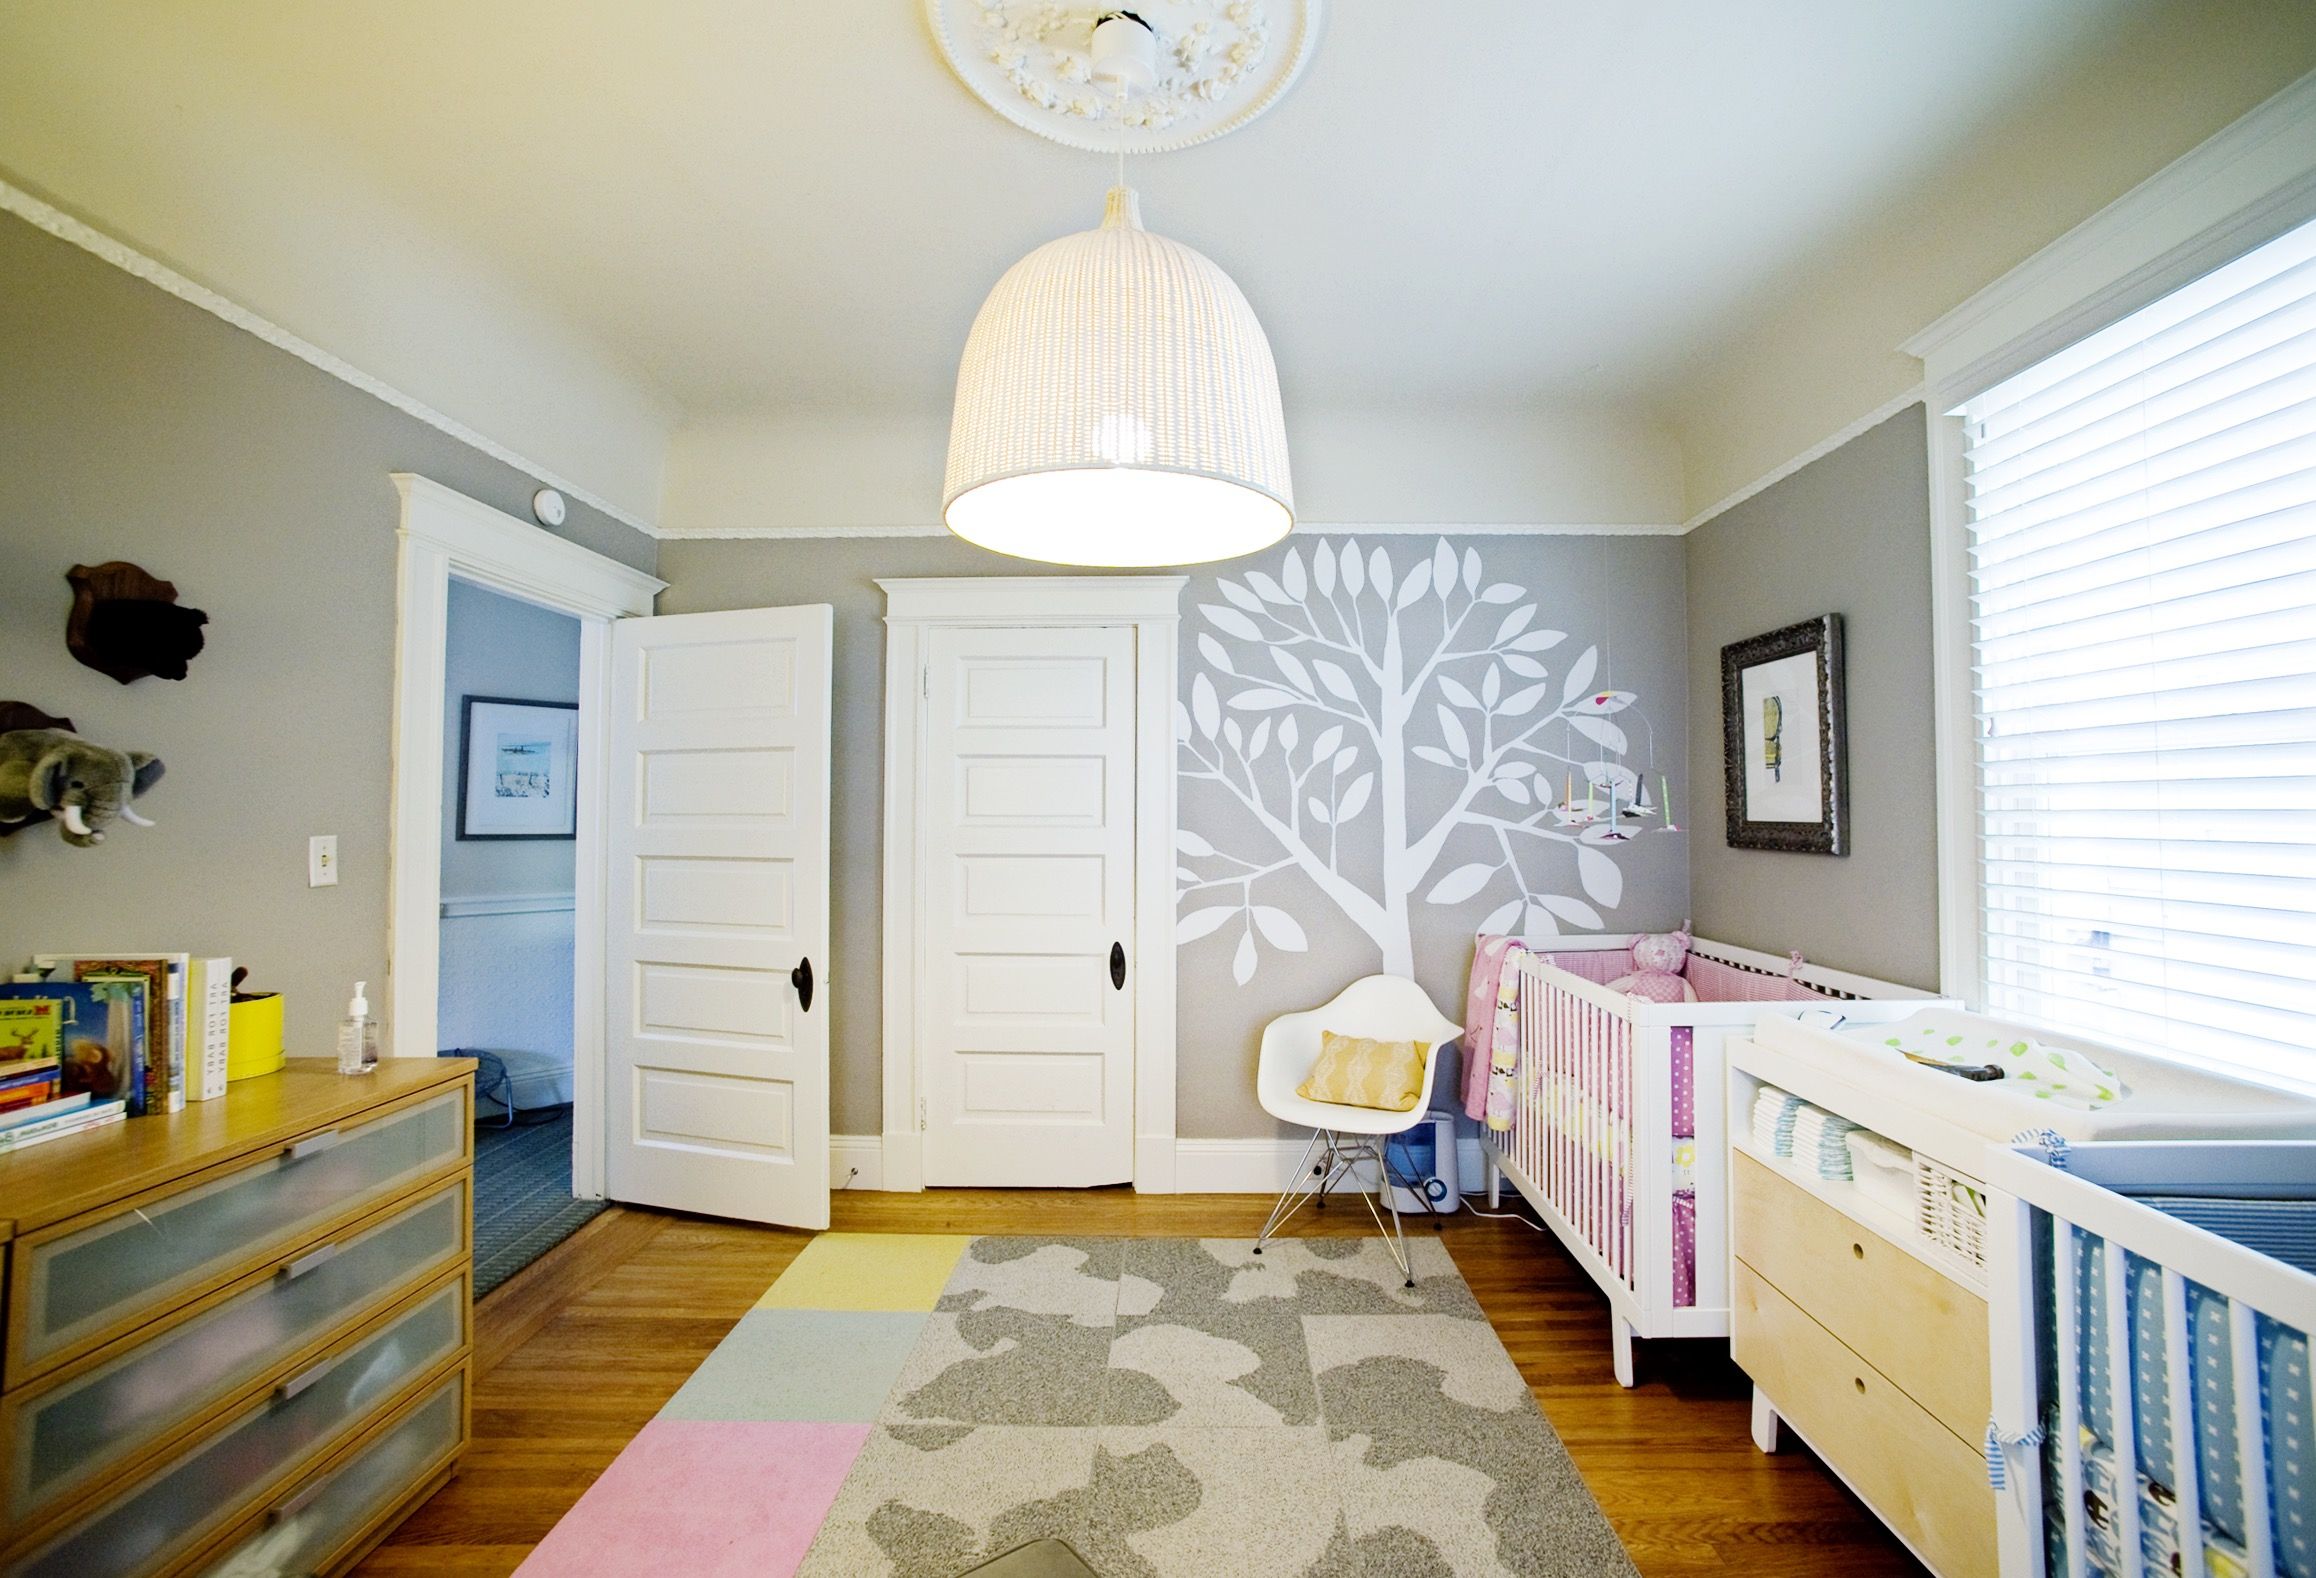 Modern Twin Nursery With Charming Wall Art And Lighting (View 31 of 33)